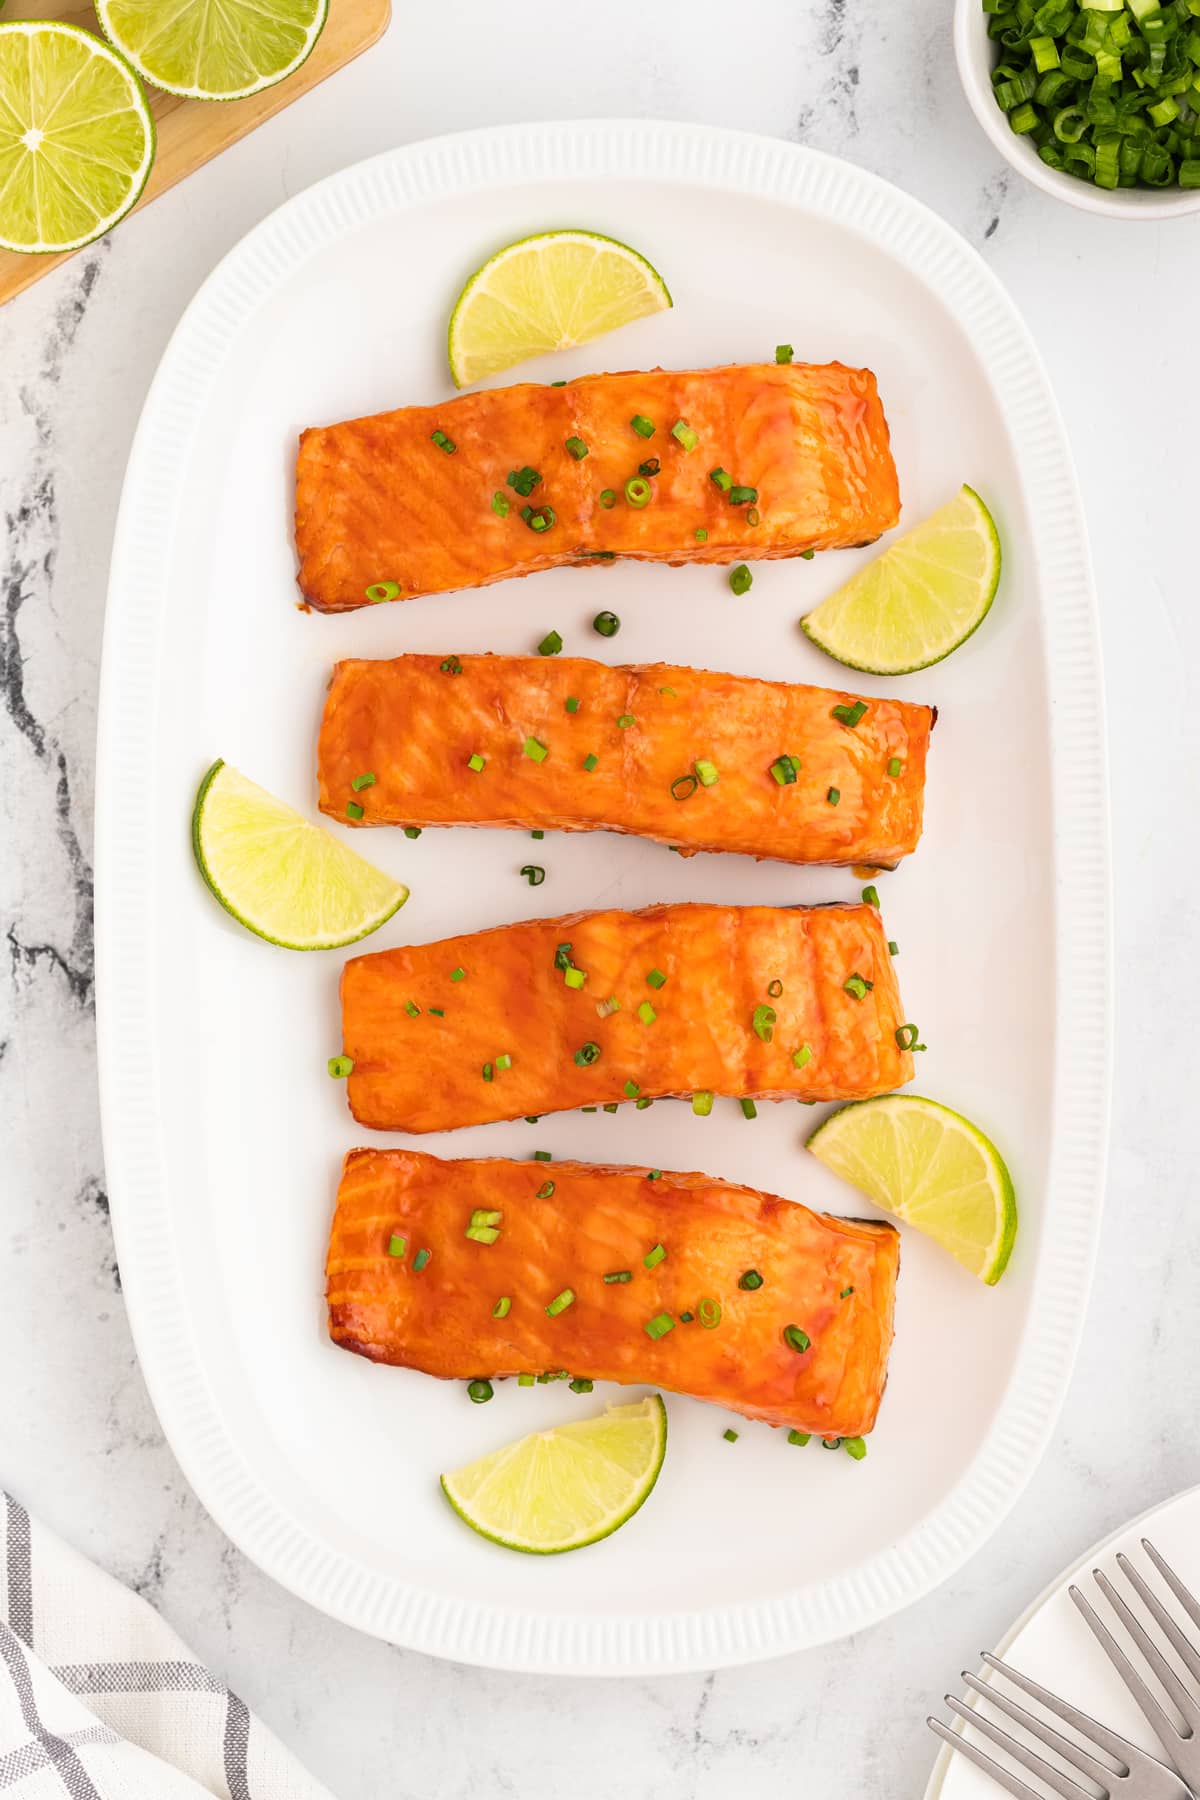 Four Honey Glazed Salmon fillets on a white plate with lime wedges